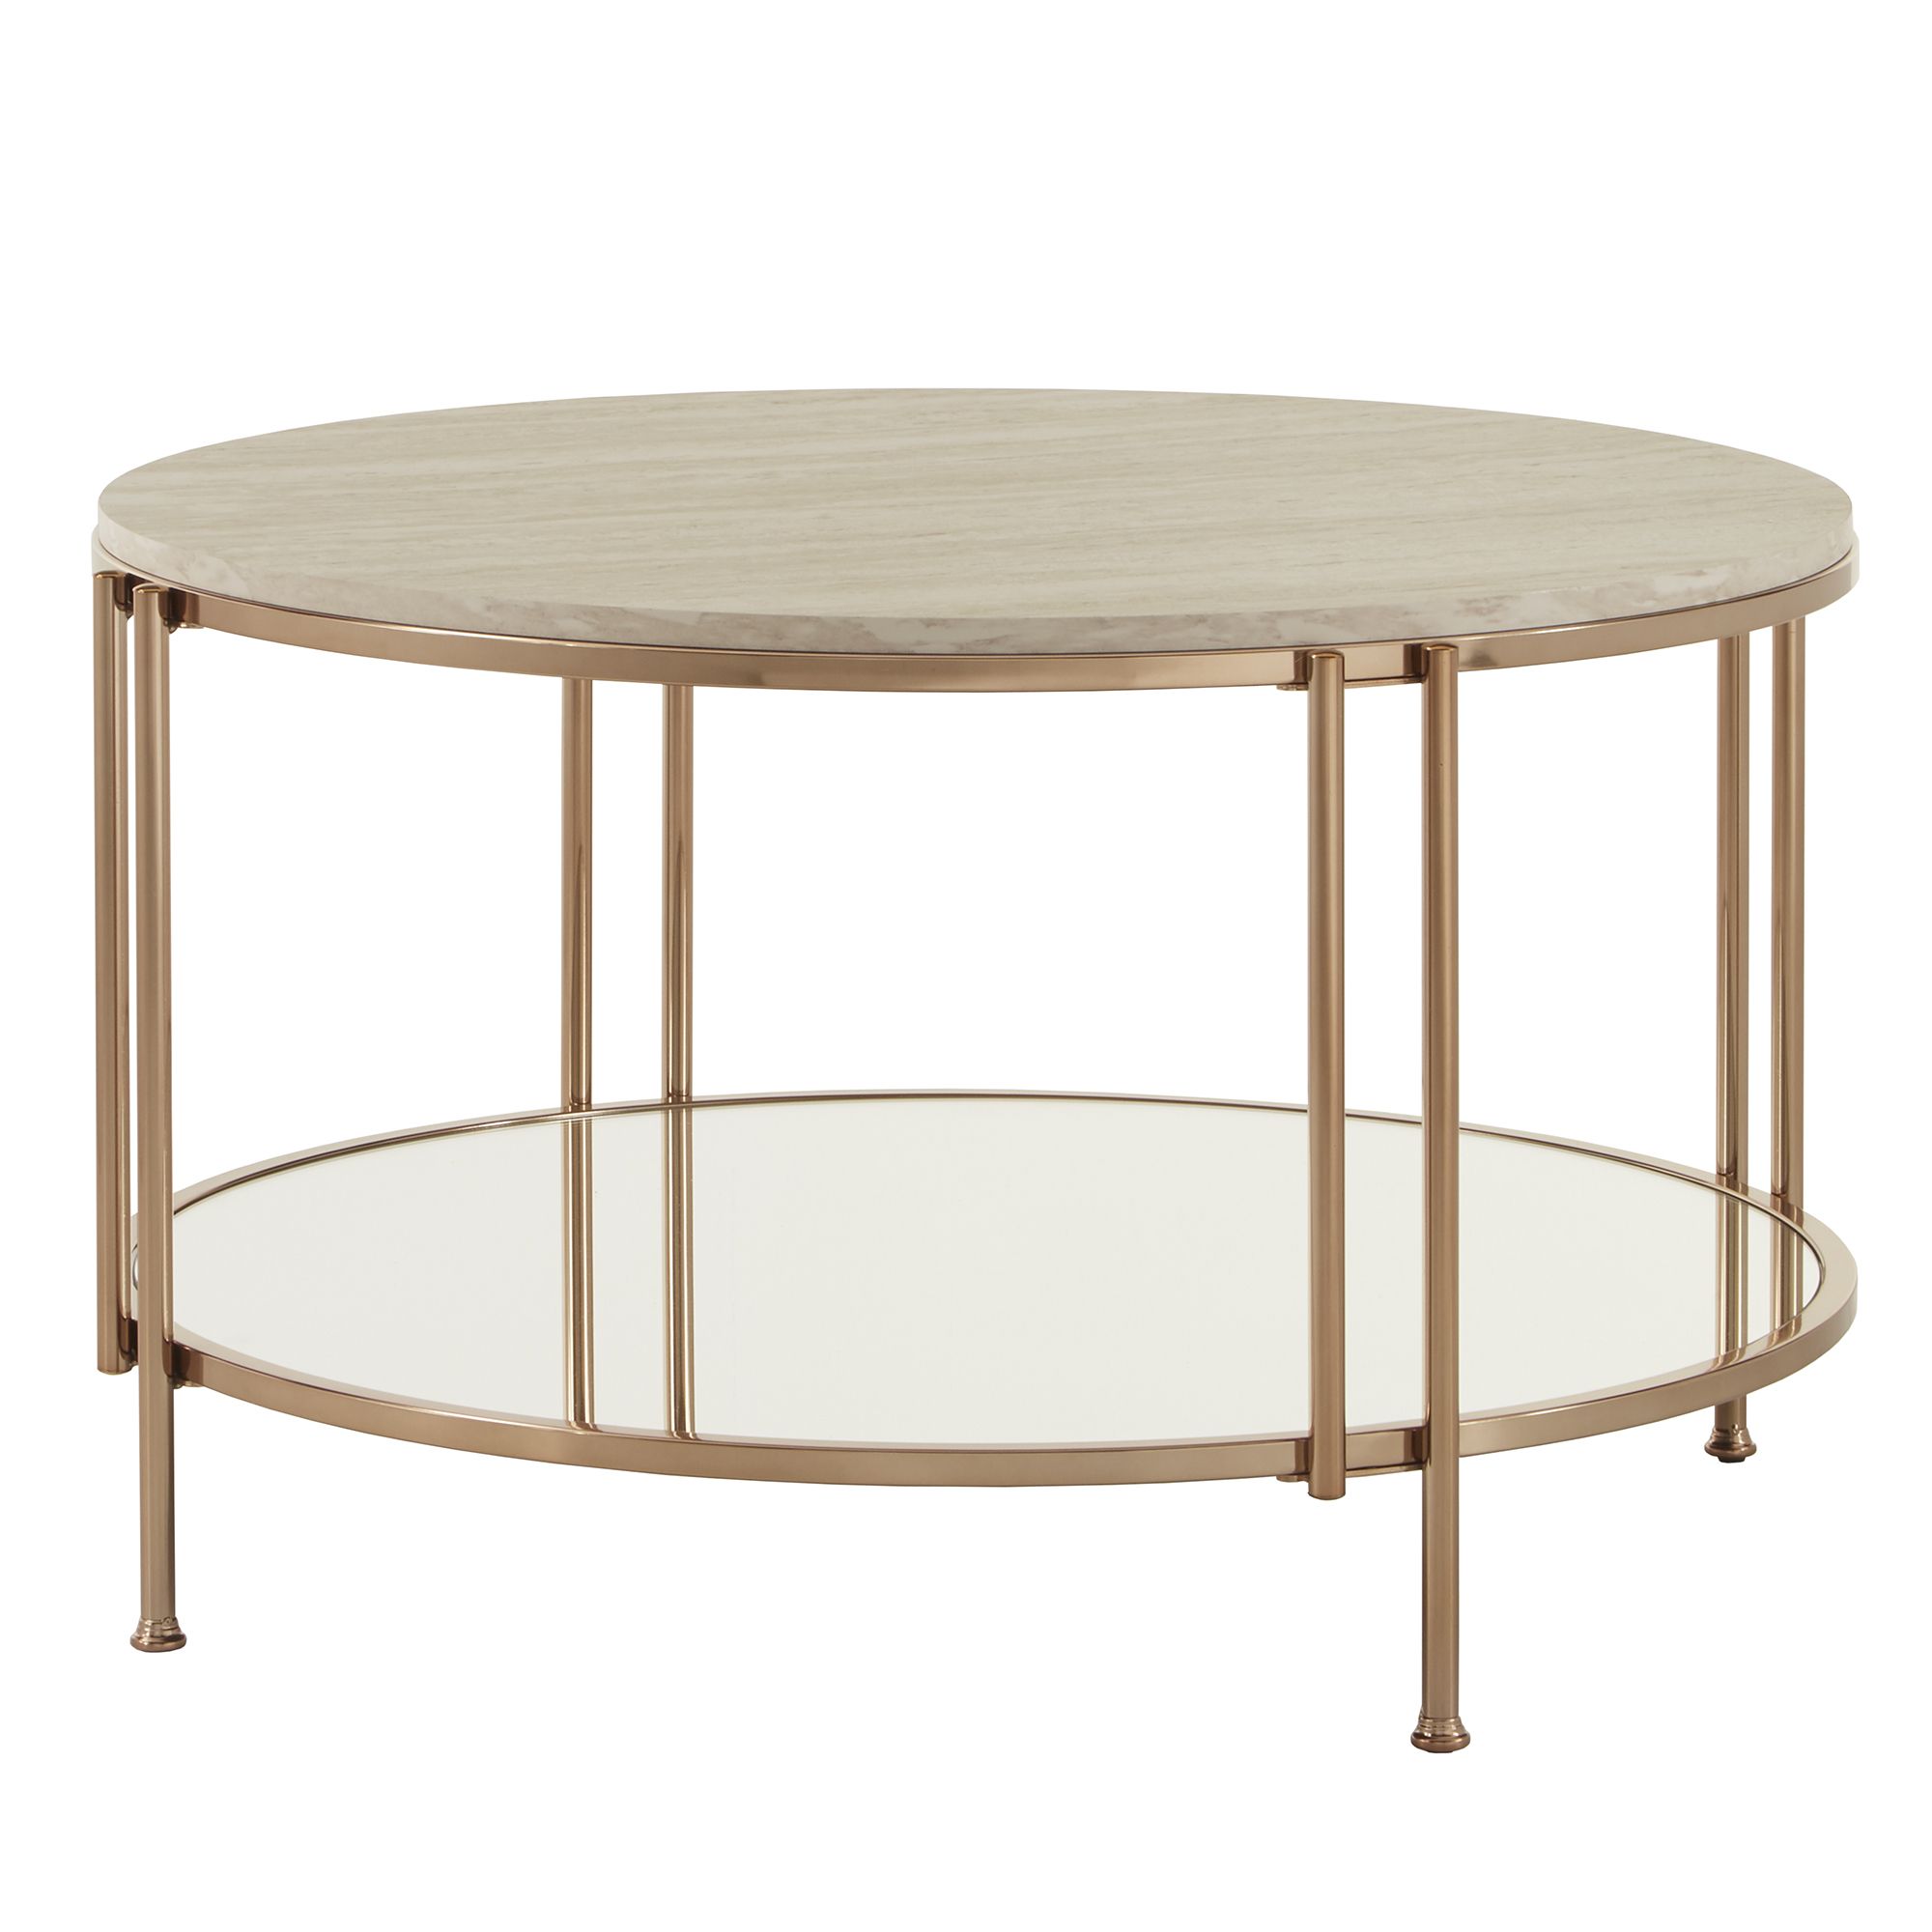 Weston Home Shaelyn Round Gold Cocktail Table With Faux In 2020 Mirrored Cocktail Tables (Gallery 2 of 20)